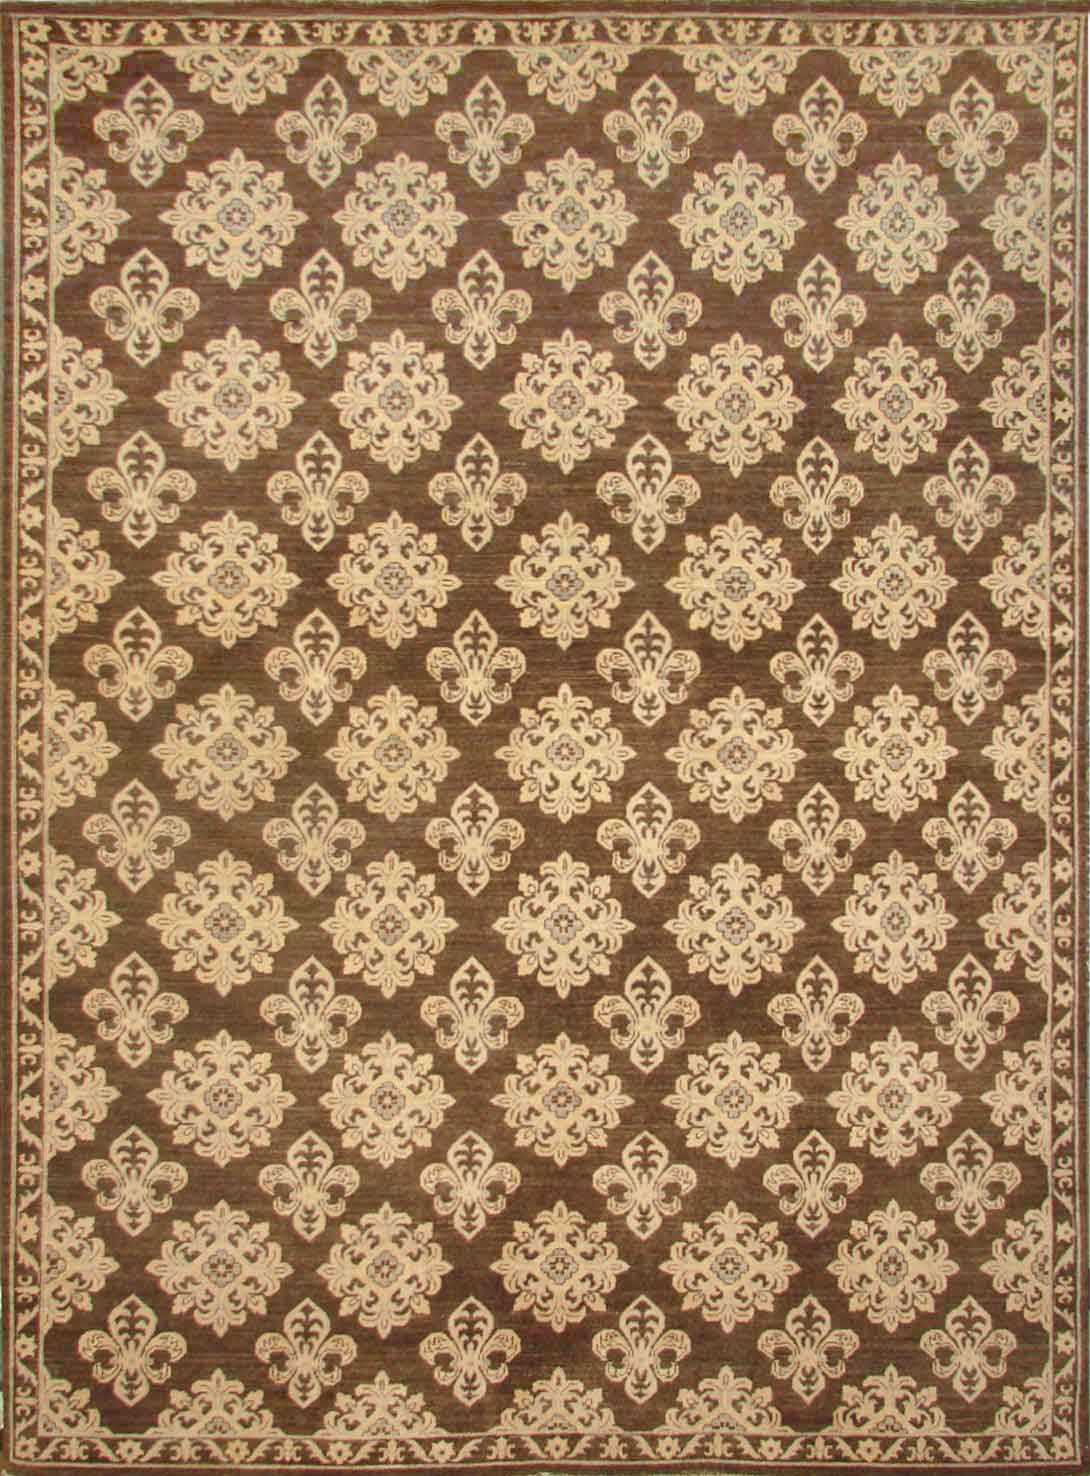 Contemporary & Transitional Rugs CHOBI 9960 Lt. Brown - Chocolate & Ivory - Beige Hand Knotted Rug